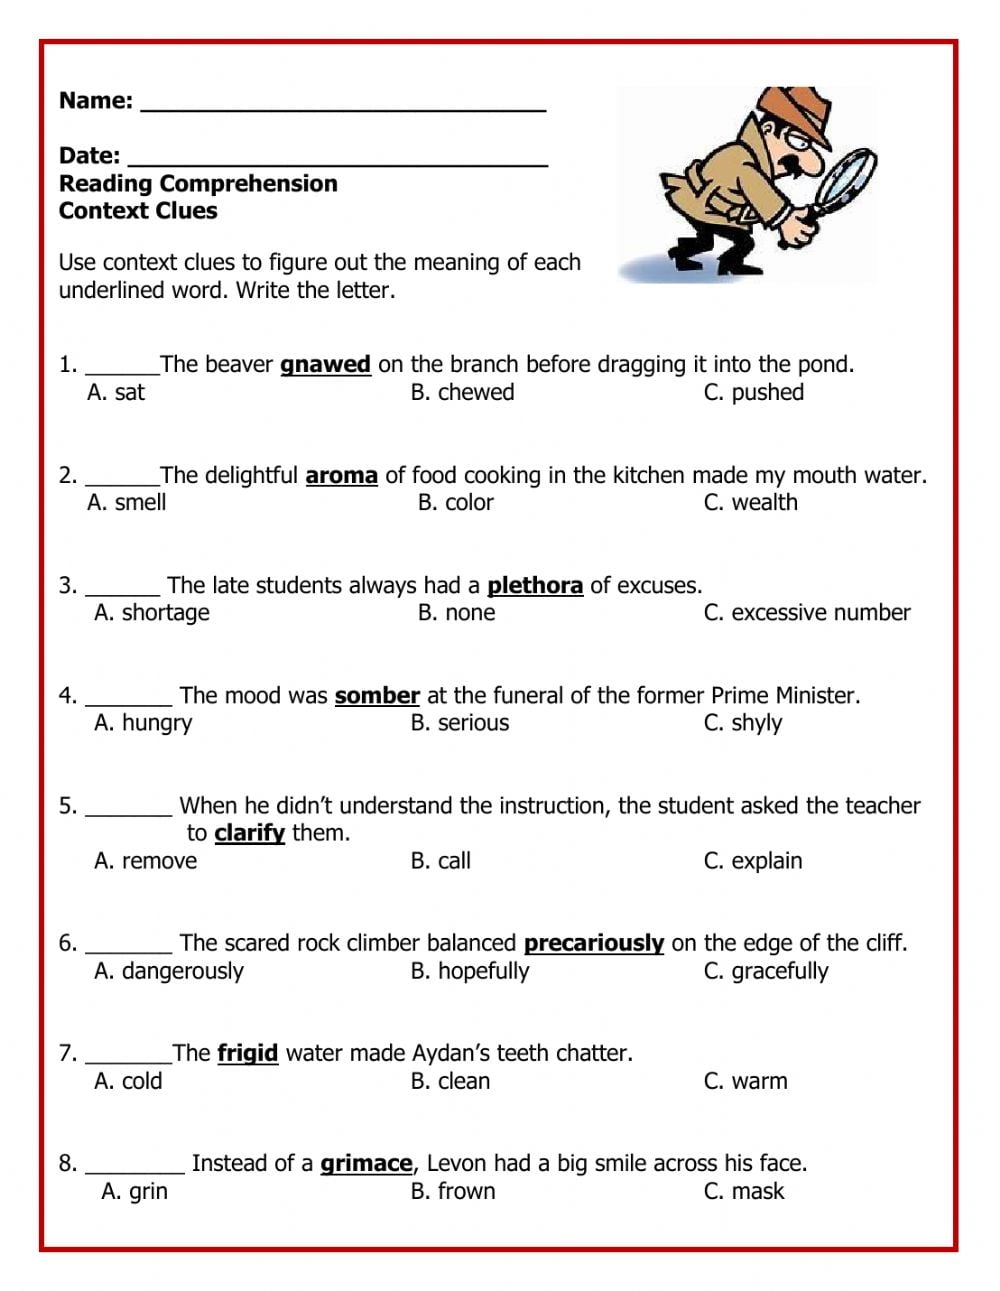 Context Clues Reading Comprehension Worksheets